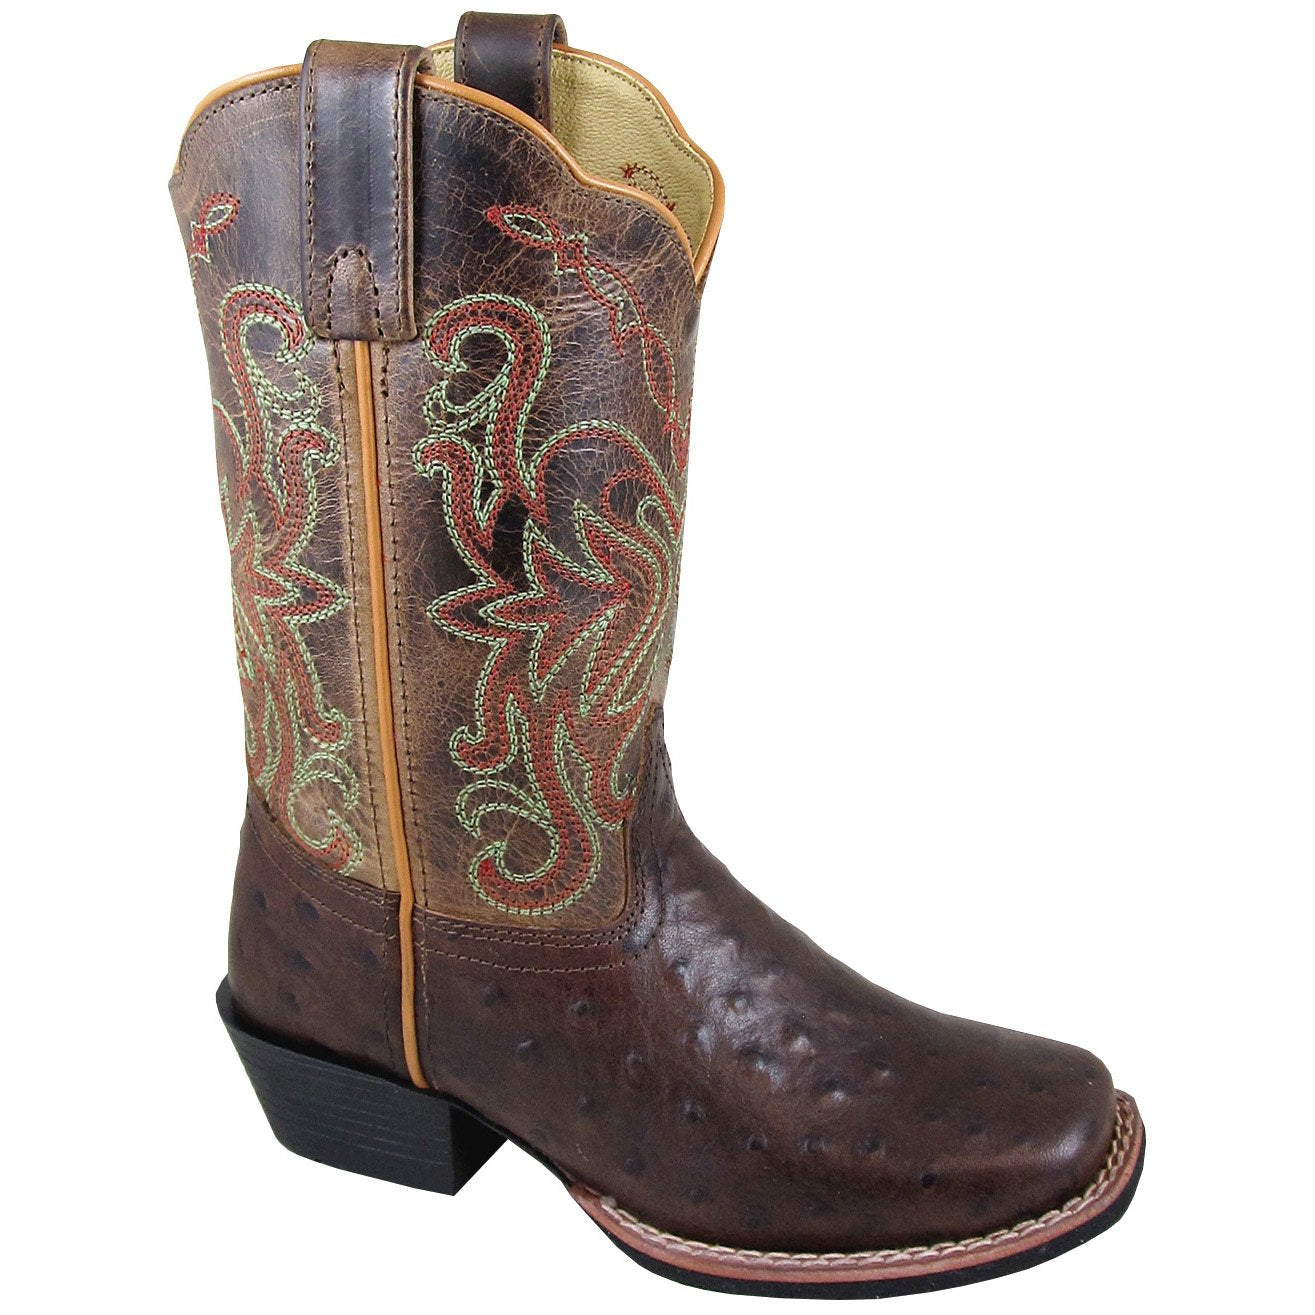 Smoky Mountain Girl's Youth Belle Tobacco/Brown Crackle Cowboy Boot